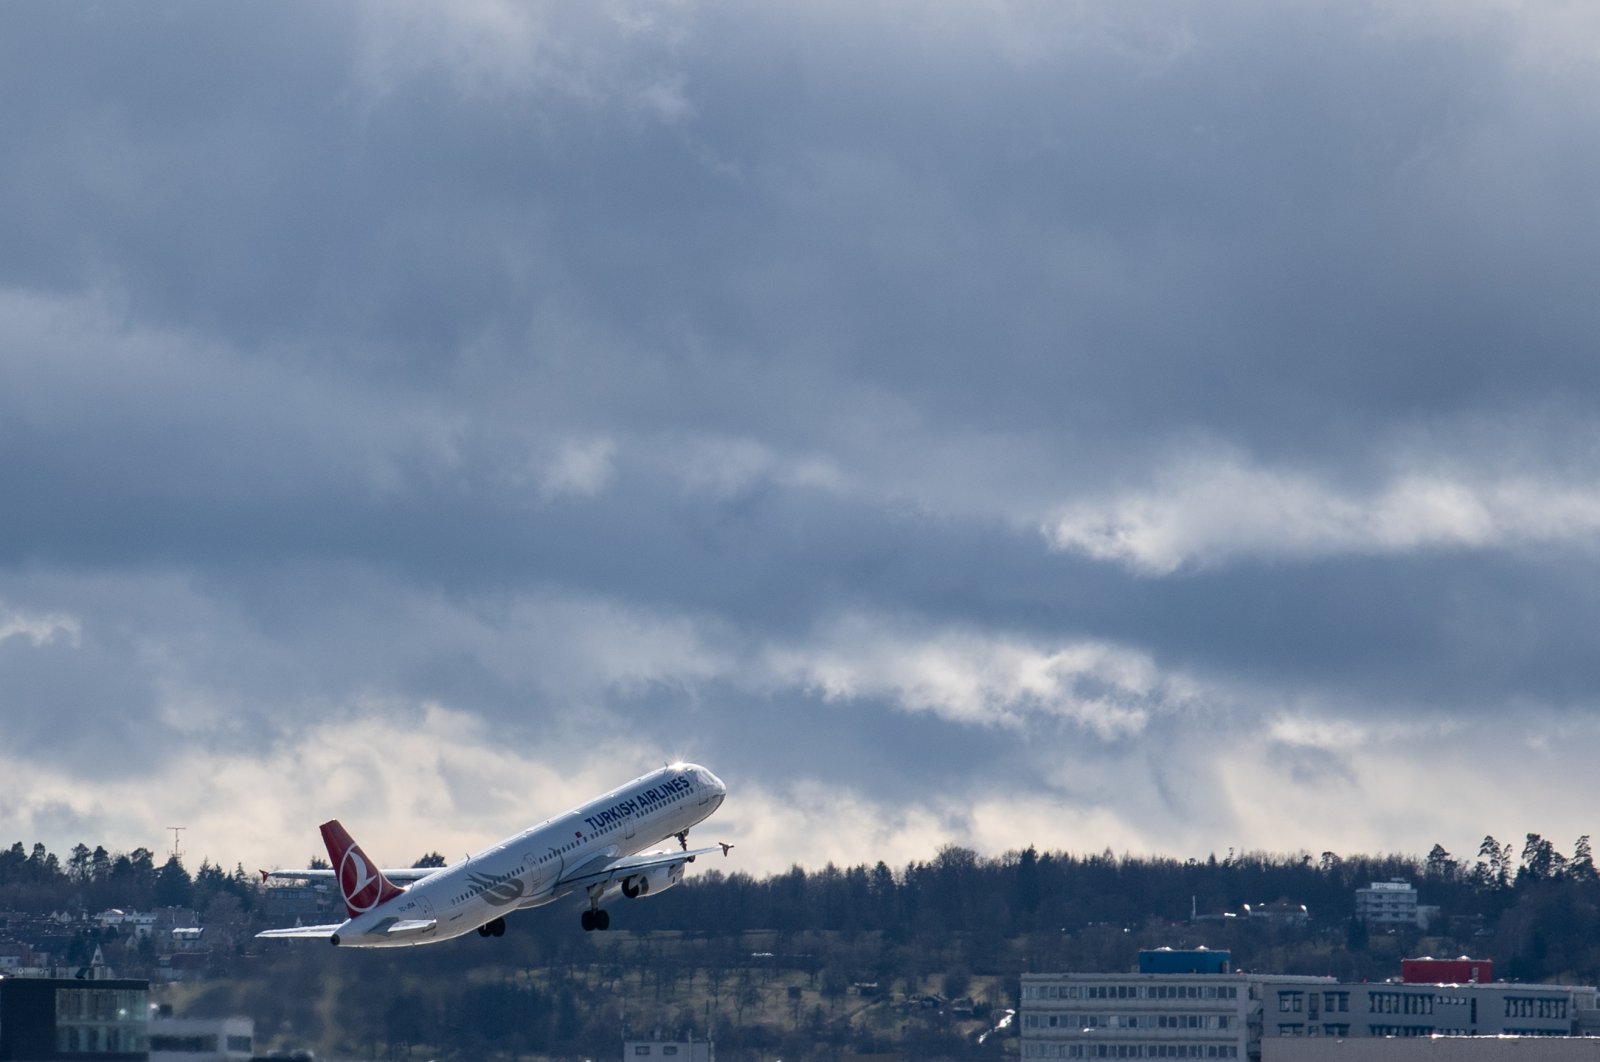 An Airbus A321-200 of Turkish Airlines takes off from Stuttgart Airport, Germany, March 7, 2019. (Reuters Photo)